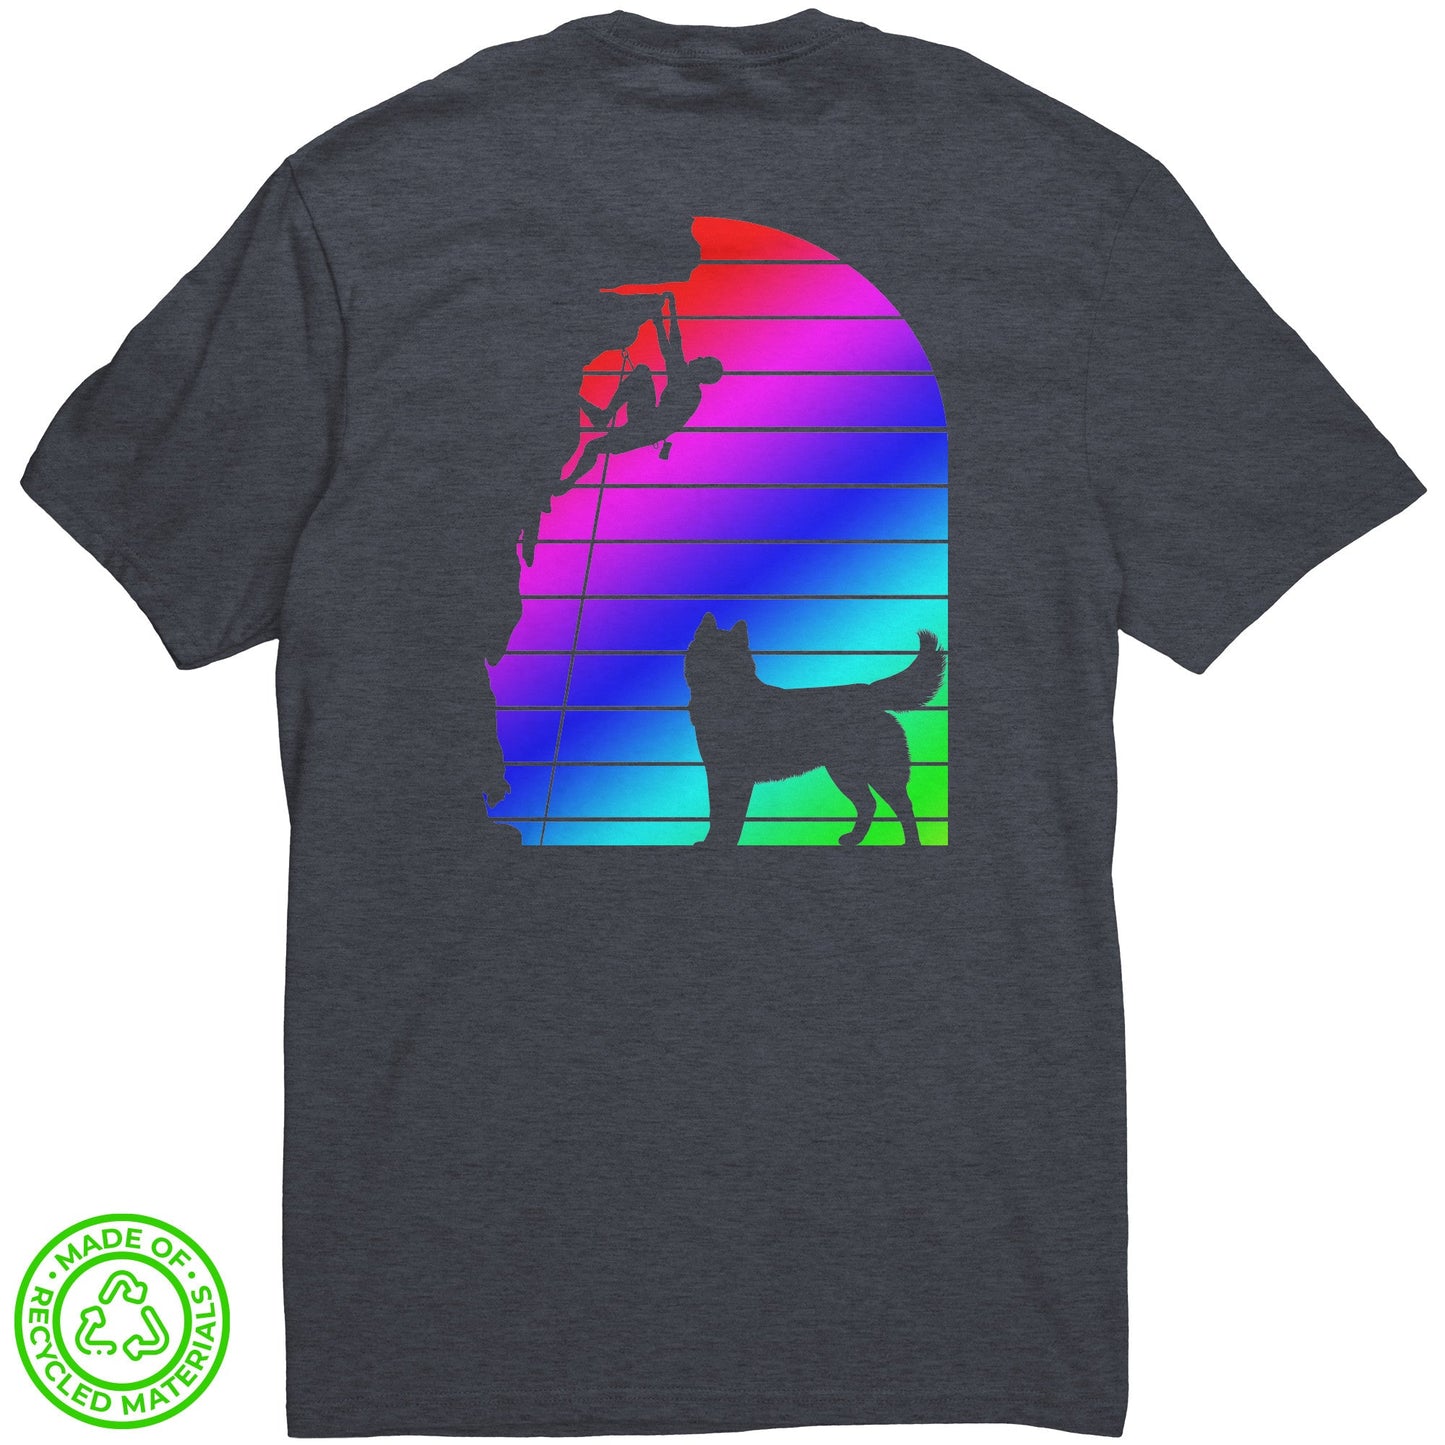 Eco-Friendly Re-Tee (Rainbow Silhouetted climber and husky)